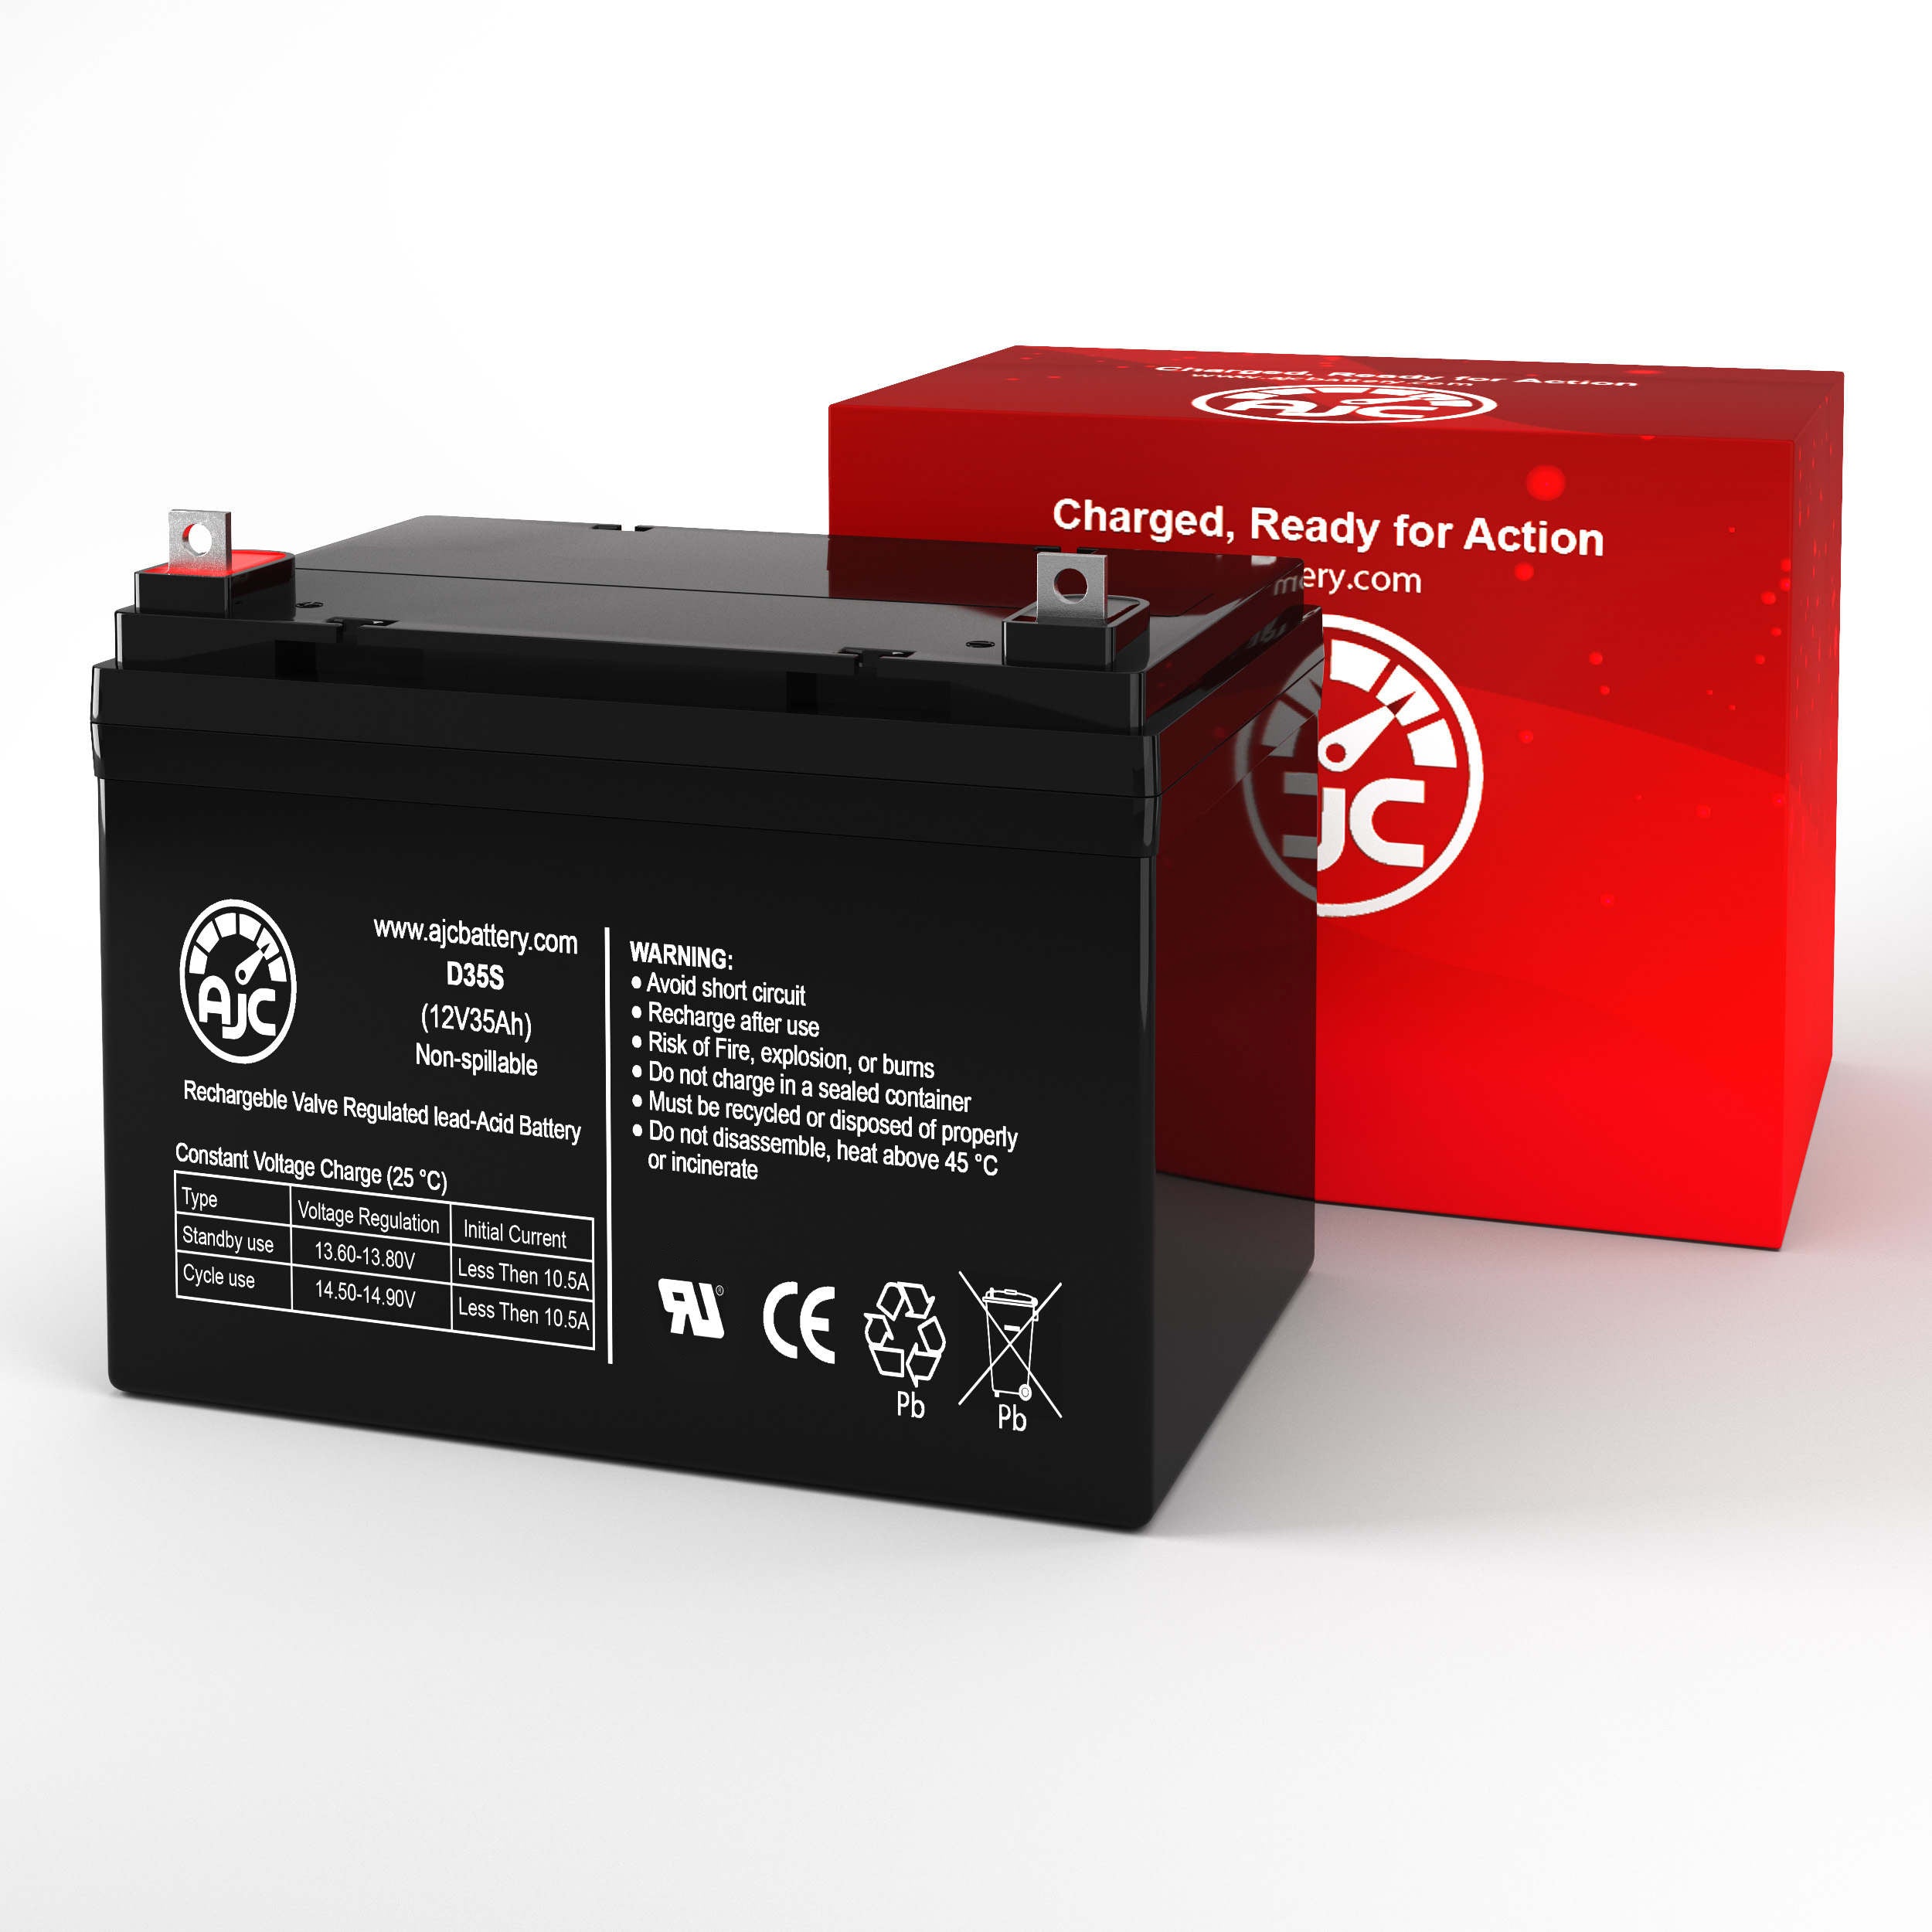 Jump N Carry JNC 660AIR 12V 35Ah Jump Starter Battery - This Is an AJC Brand Replacement - image 2 of 6